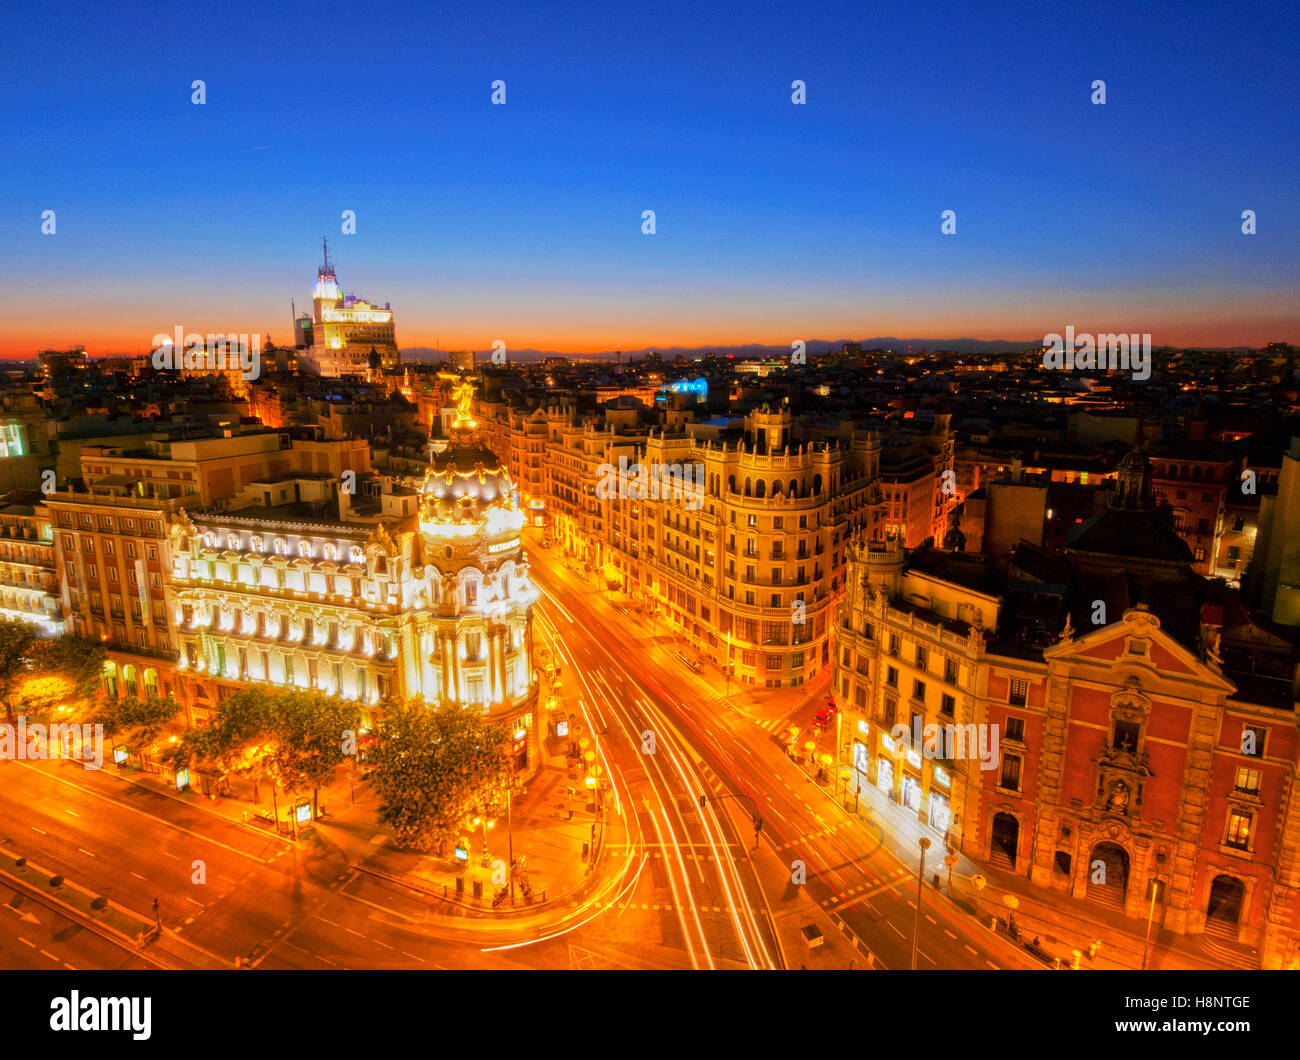 Spain, Madrid, Elevated view of the Metropolis Building. Stock Photo